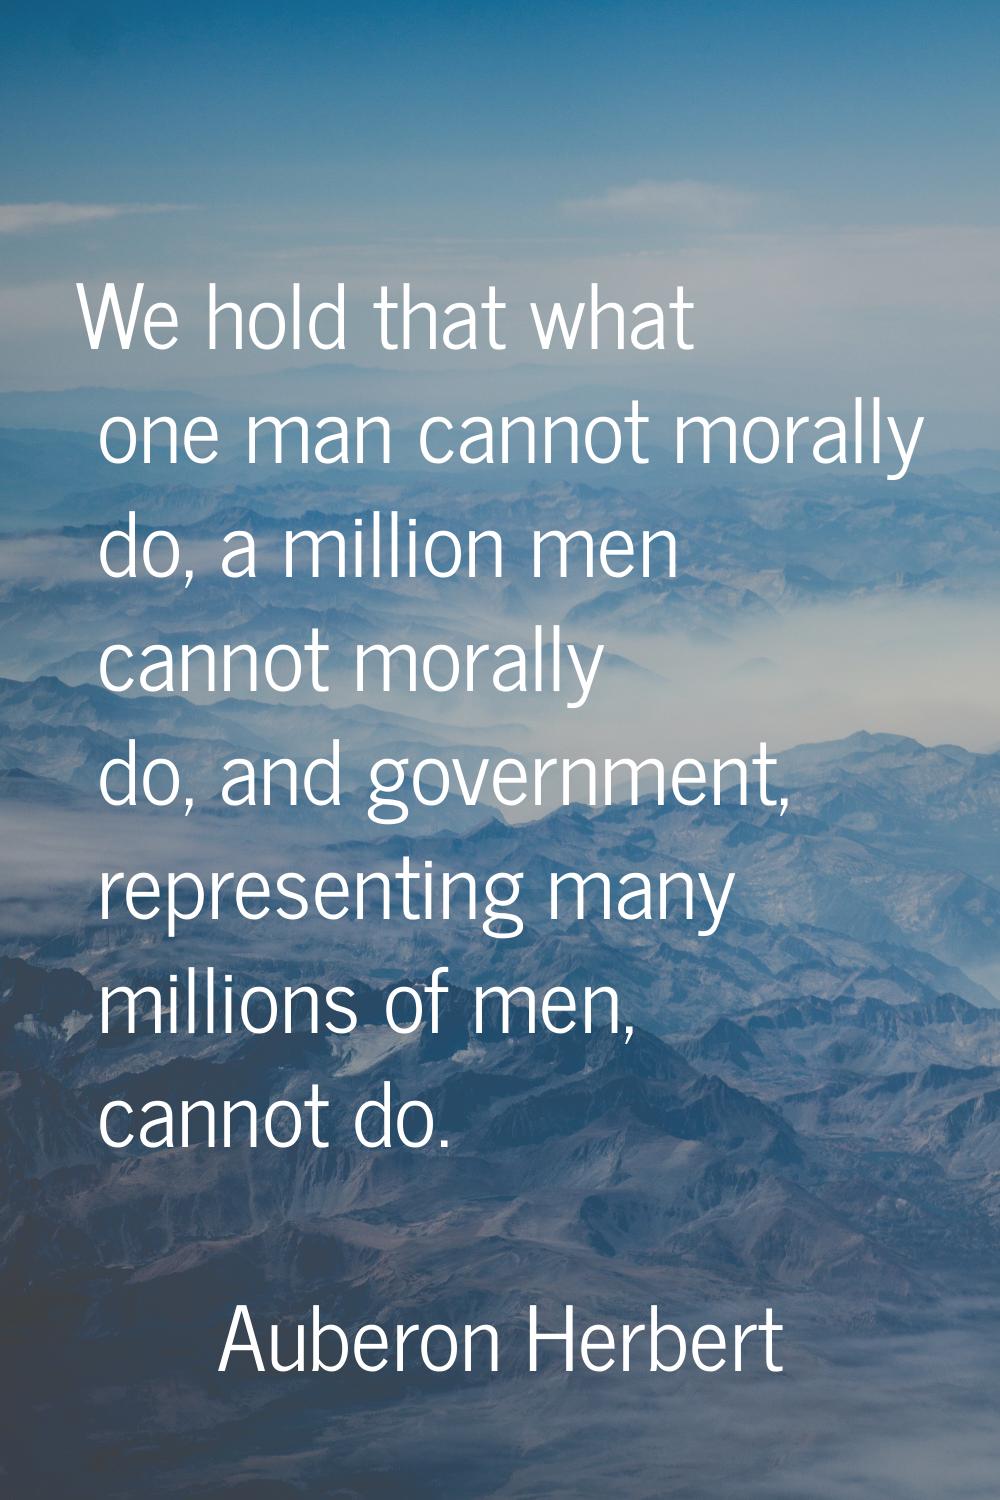 We hold that what one man cannot morally do, a million men cannot morally do, and government, repre